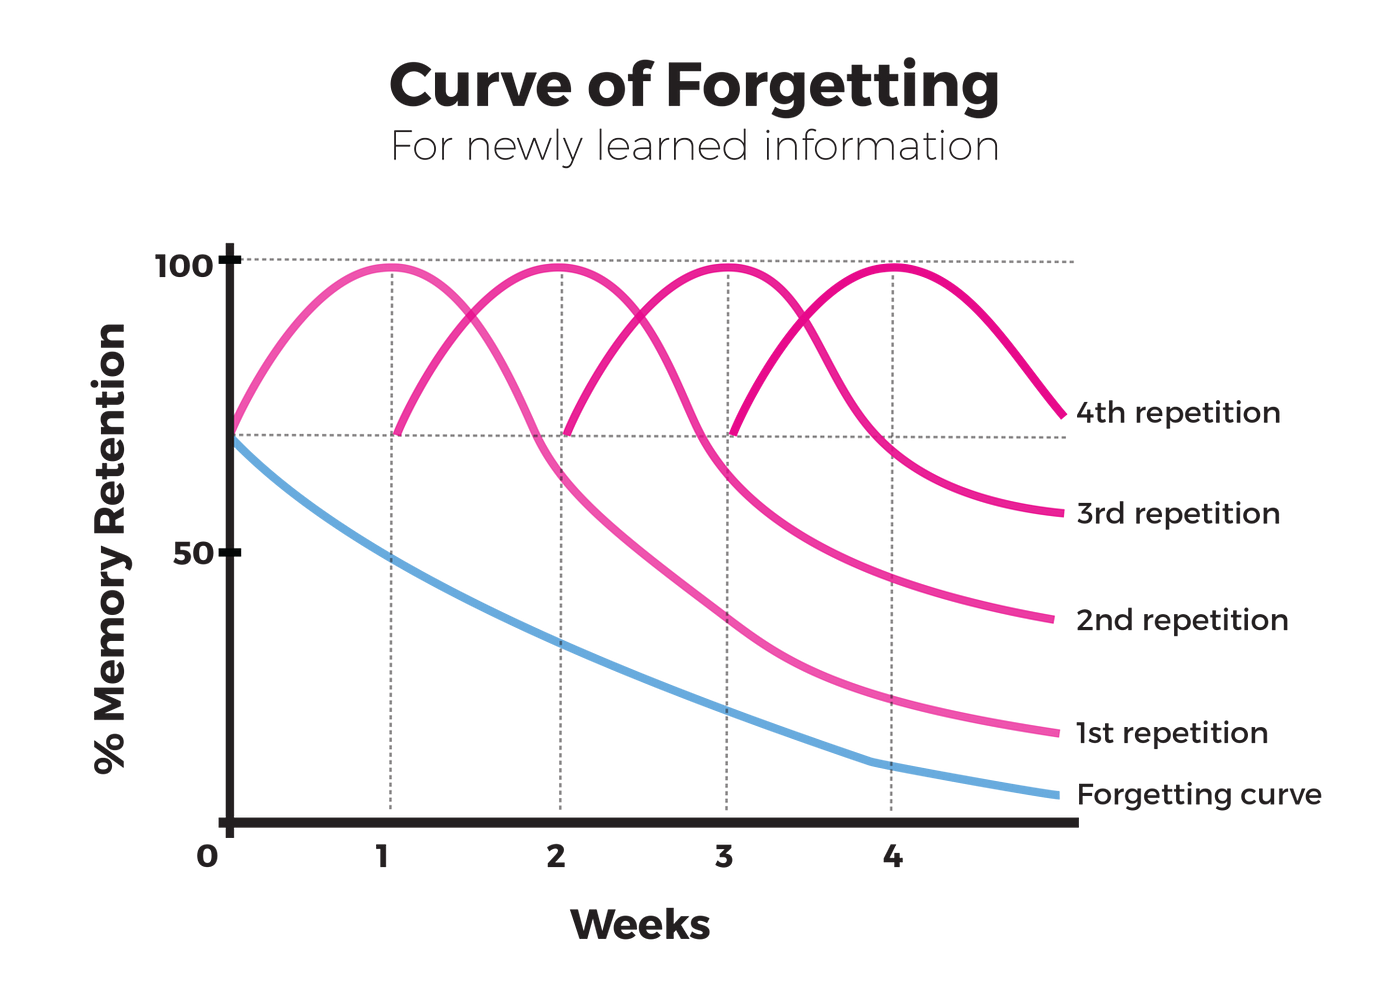 What you need to know… about The Curve of Forgetting